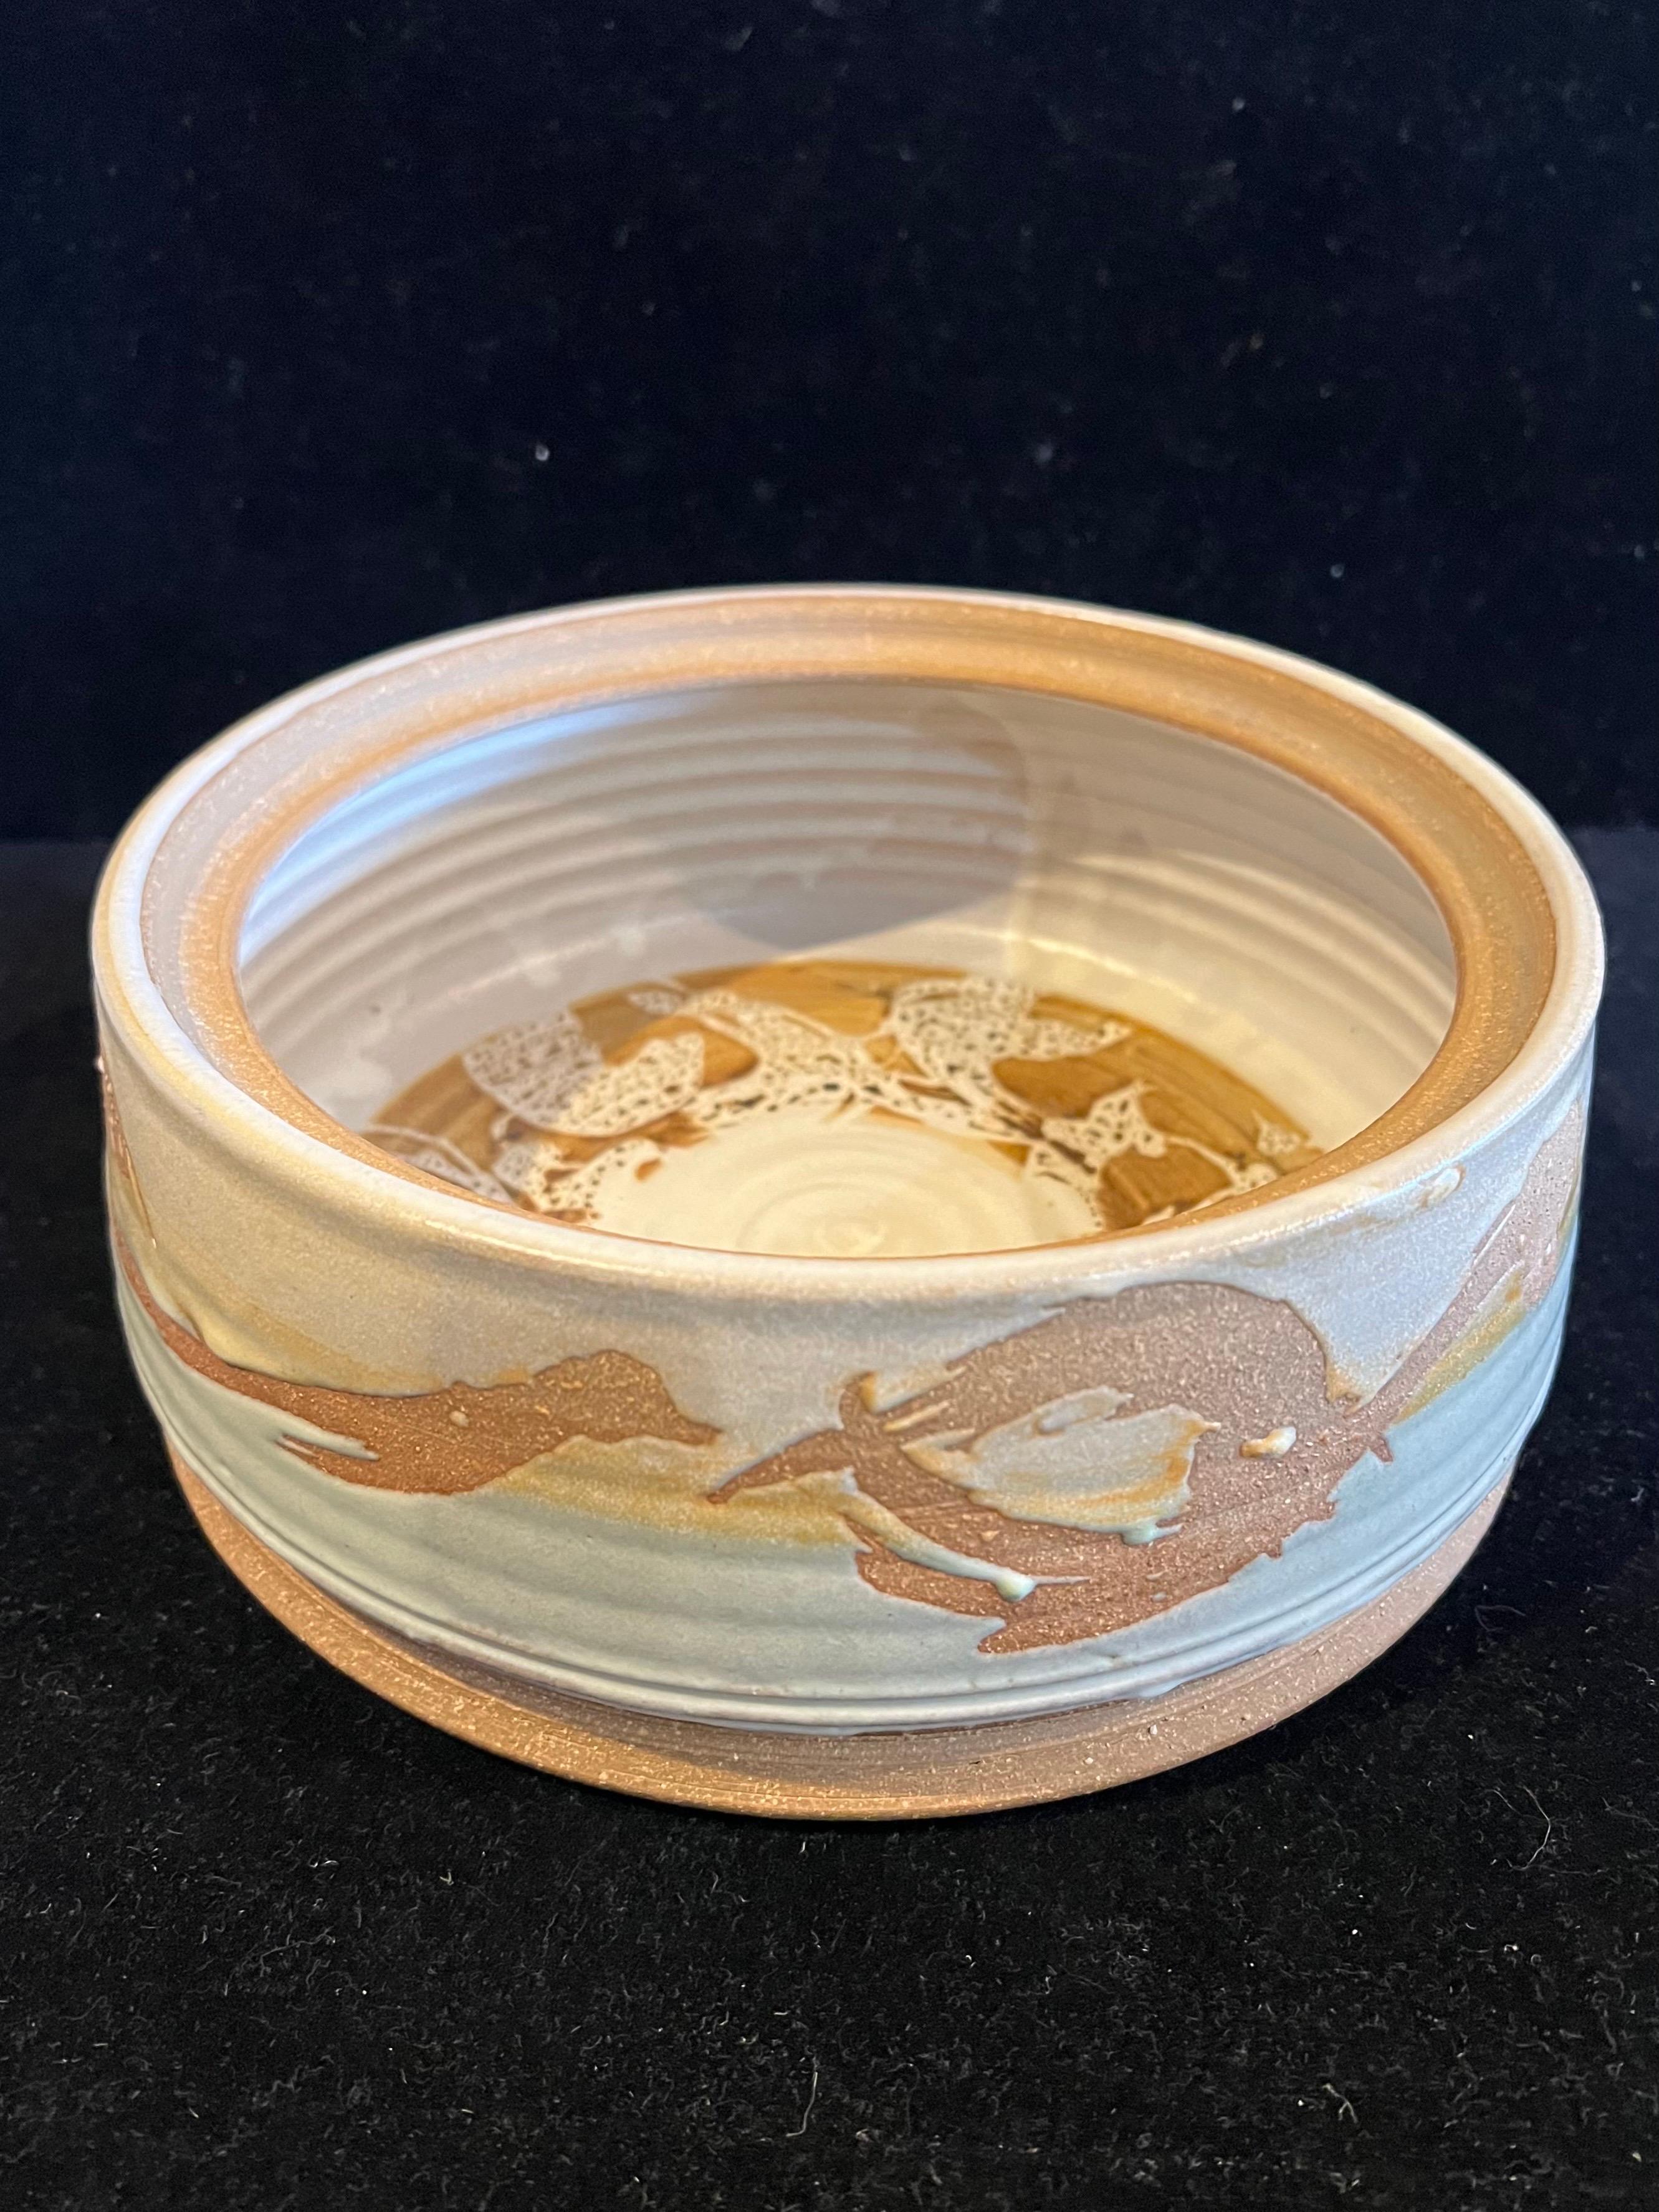 This beautiful well-done piece by ceramic artist Don Hanson, circa 1970 has a nice covered dish glazed inside and outside, with no chips or cracks beautiful earth tones colors, signed at the bottom a beautiful piece that looks great with Mid Century